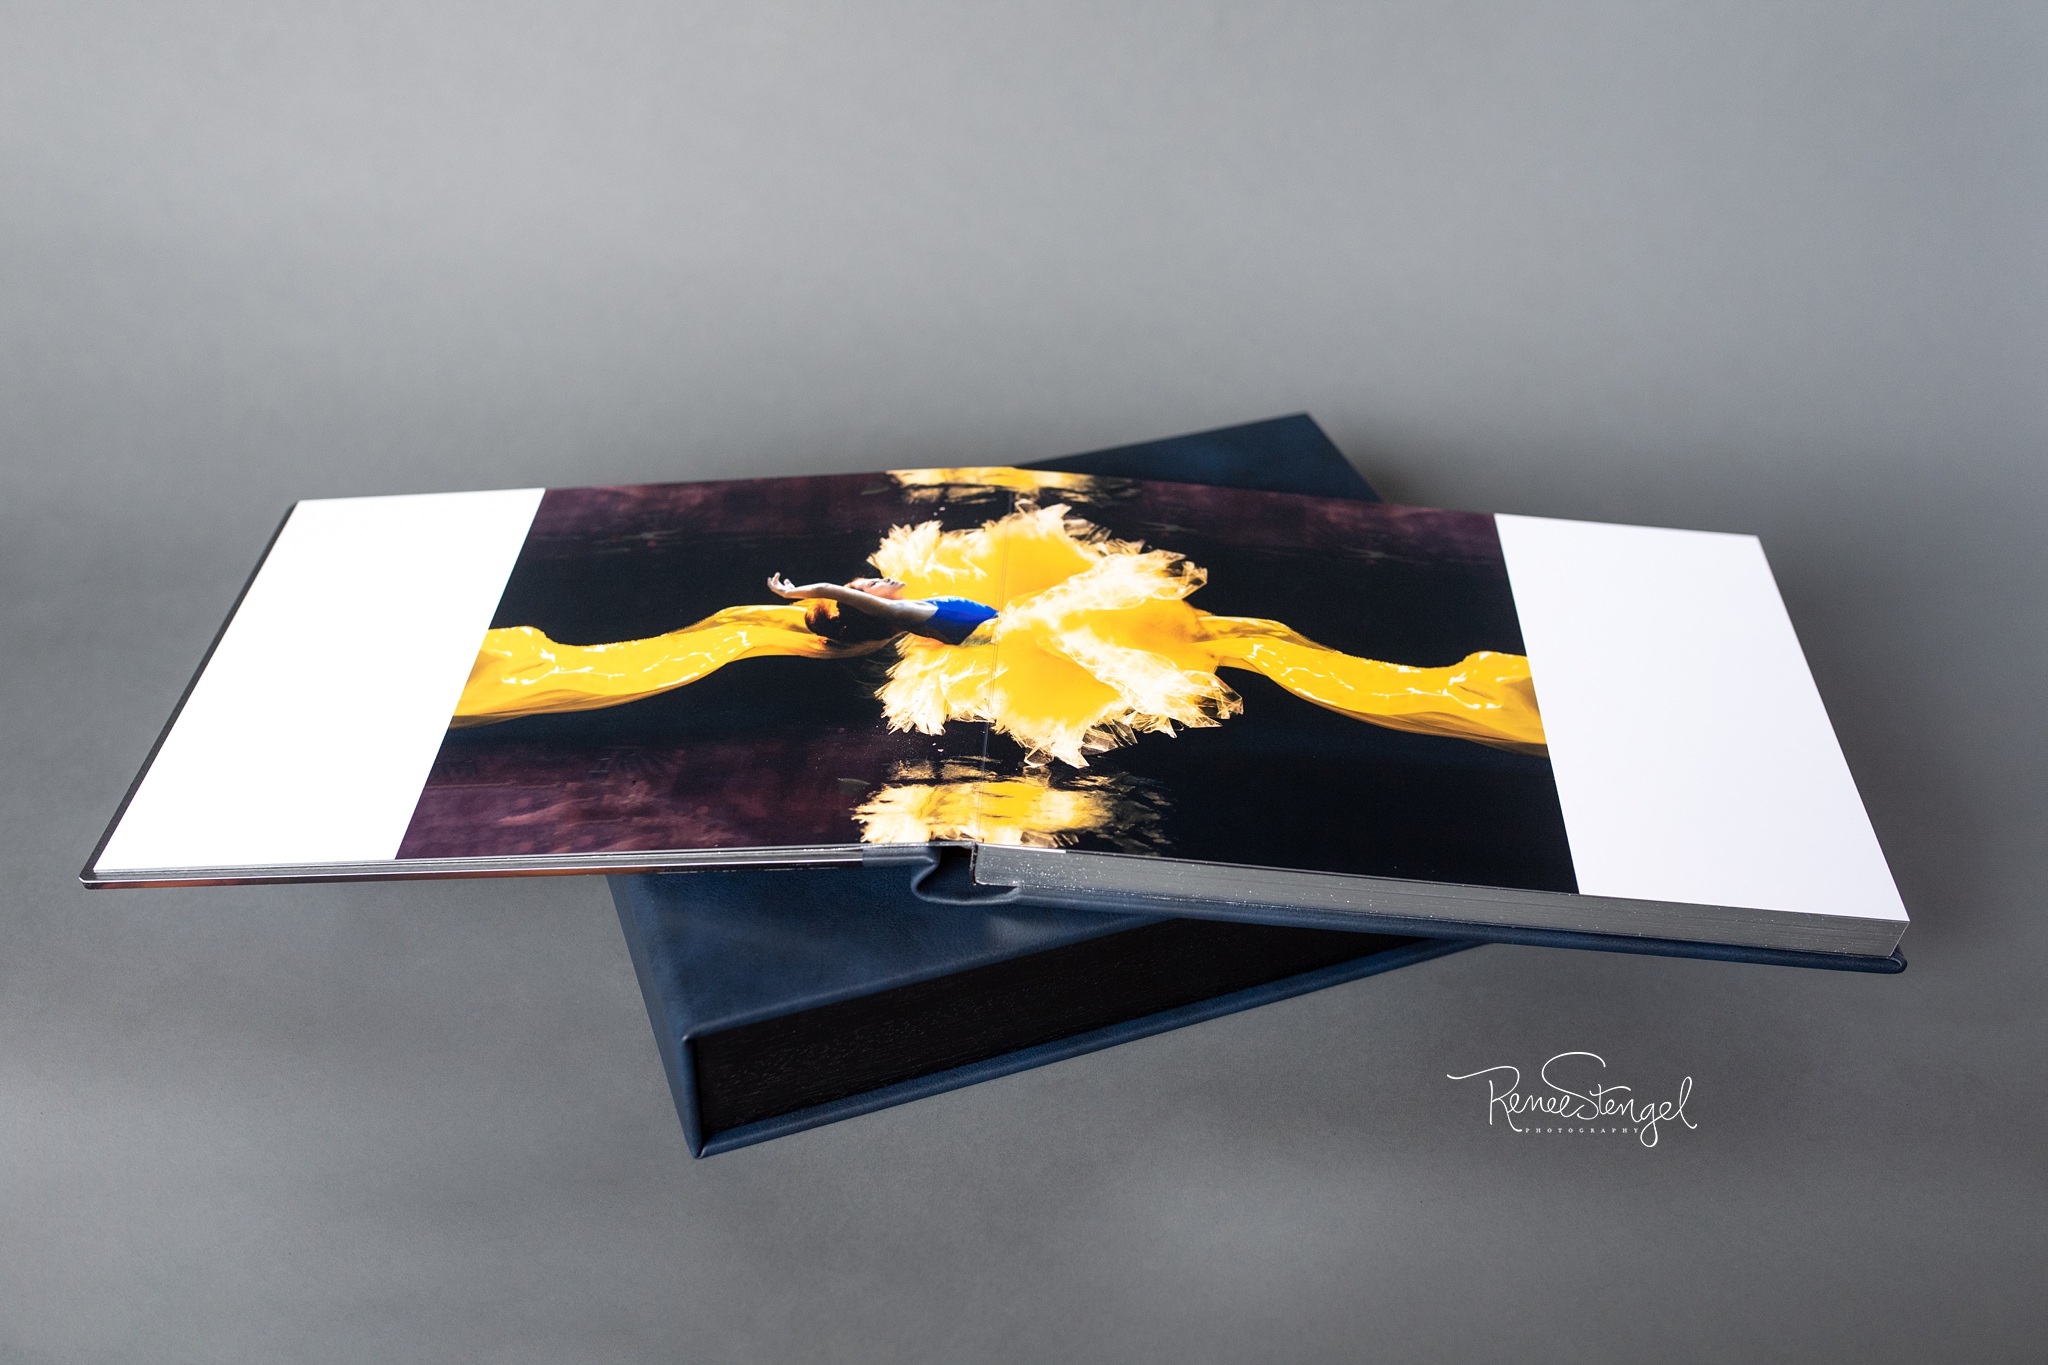 Underwater Ballet Signature Acrylic Album from Europe with matching leather Album Box